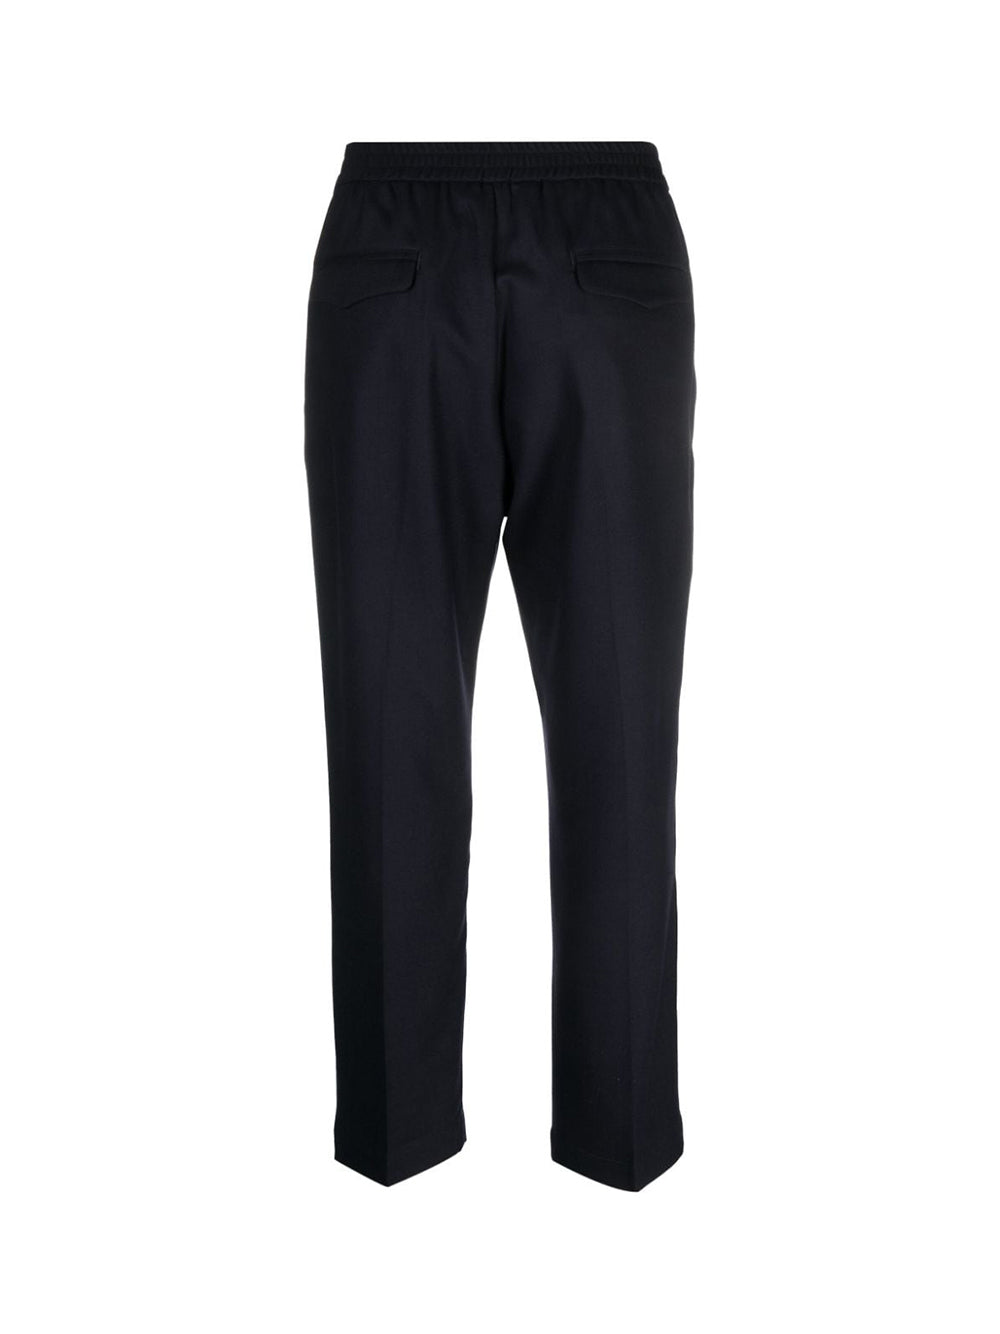 Alfonso Frare Trousers